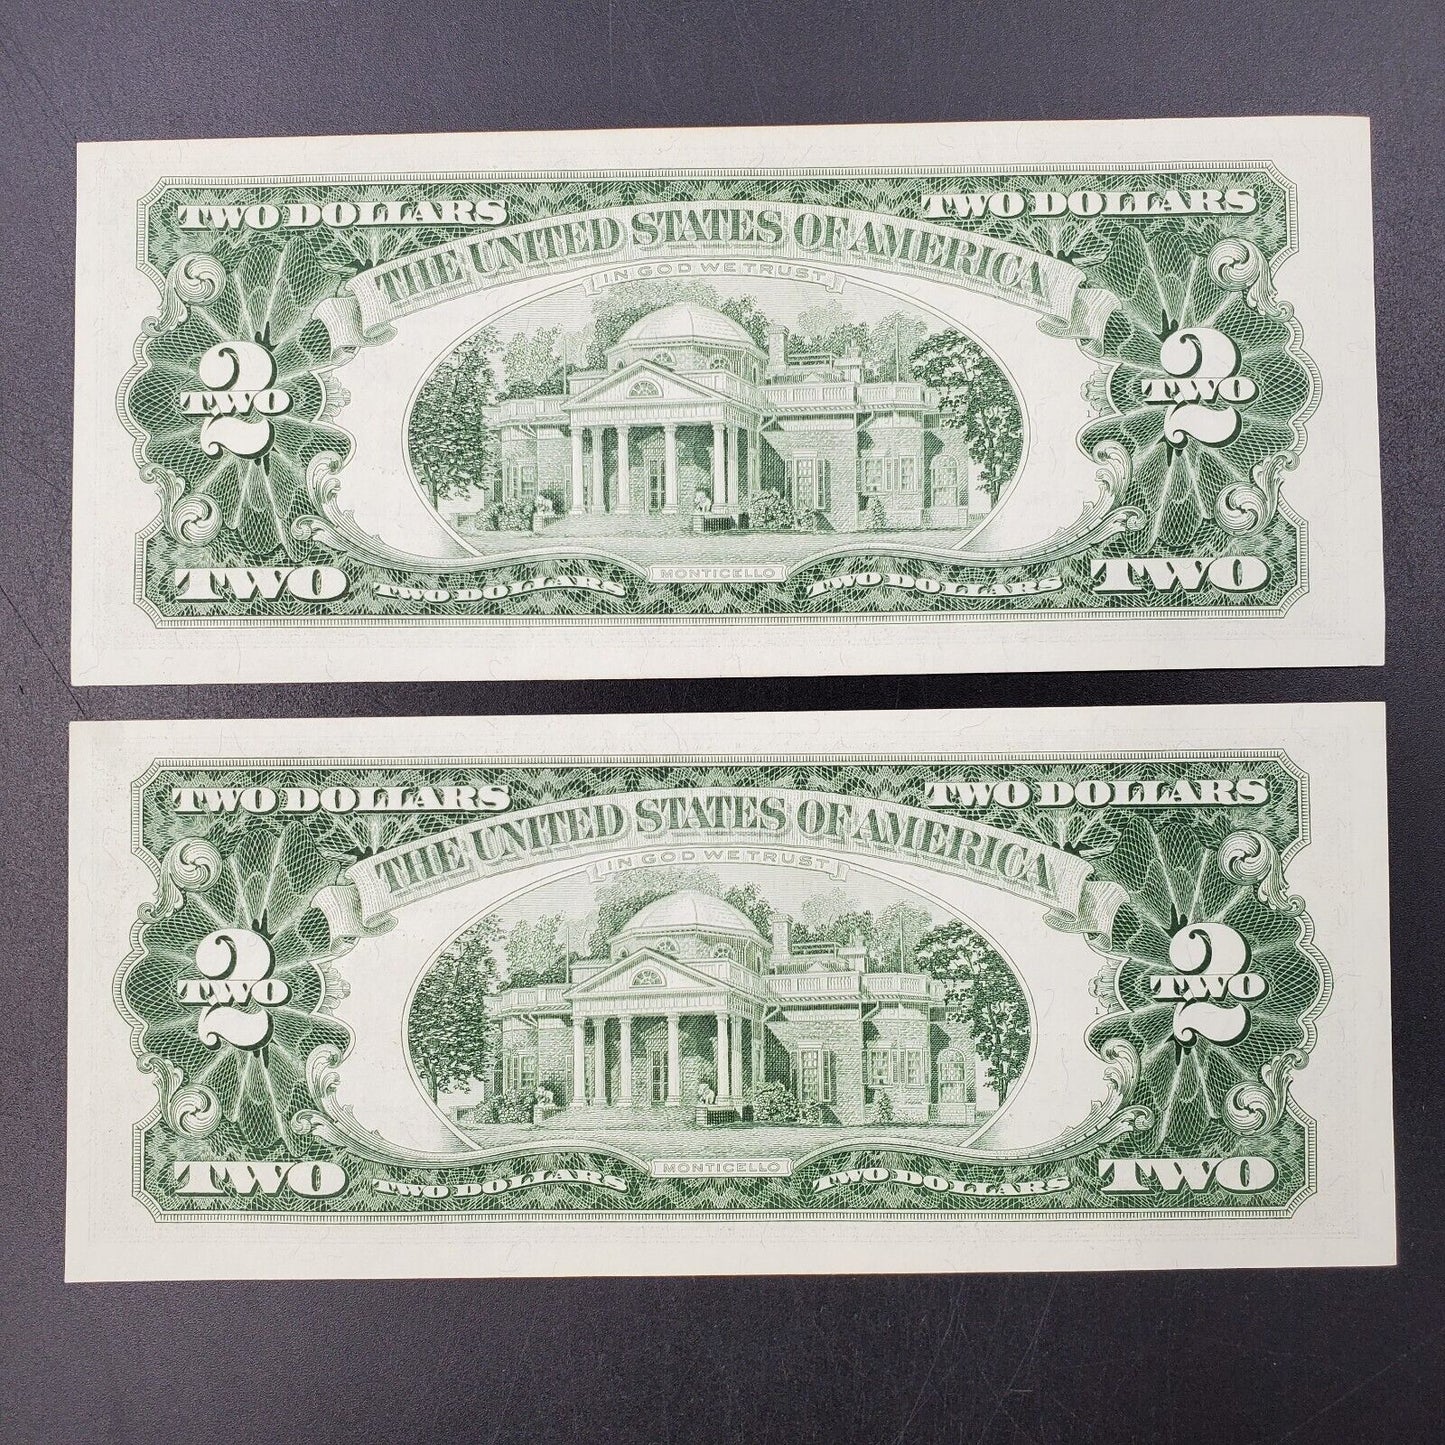 2 NOTE CONSECUTIVE SET 1963 $2 Red Seal Legal Tender Uncirculated Note Bills